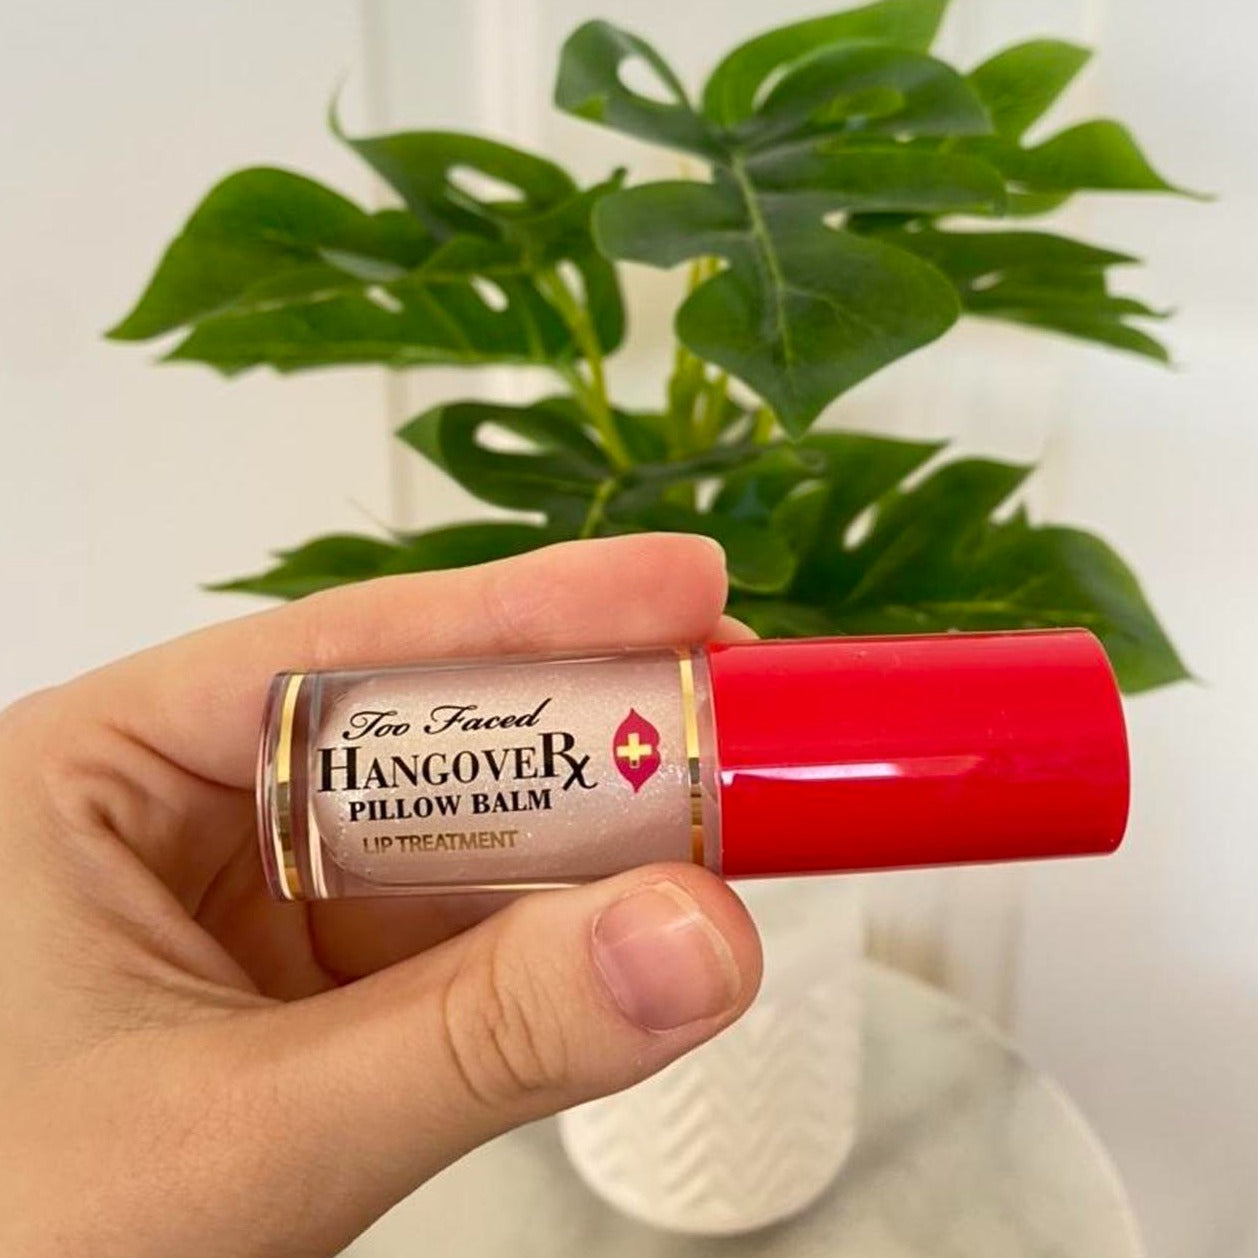 The Too Faced Hangover RX Pillow Balm Ultra-Hydrating and Nourishing Lip Treatment Set hydrates and replenishes your pout with 4 Super size deluxe size exclusive shades and scents that will take you into the holidays and beyond year around.